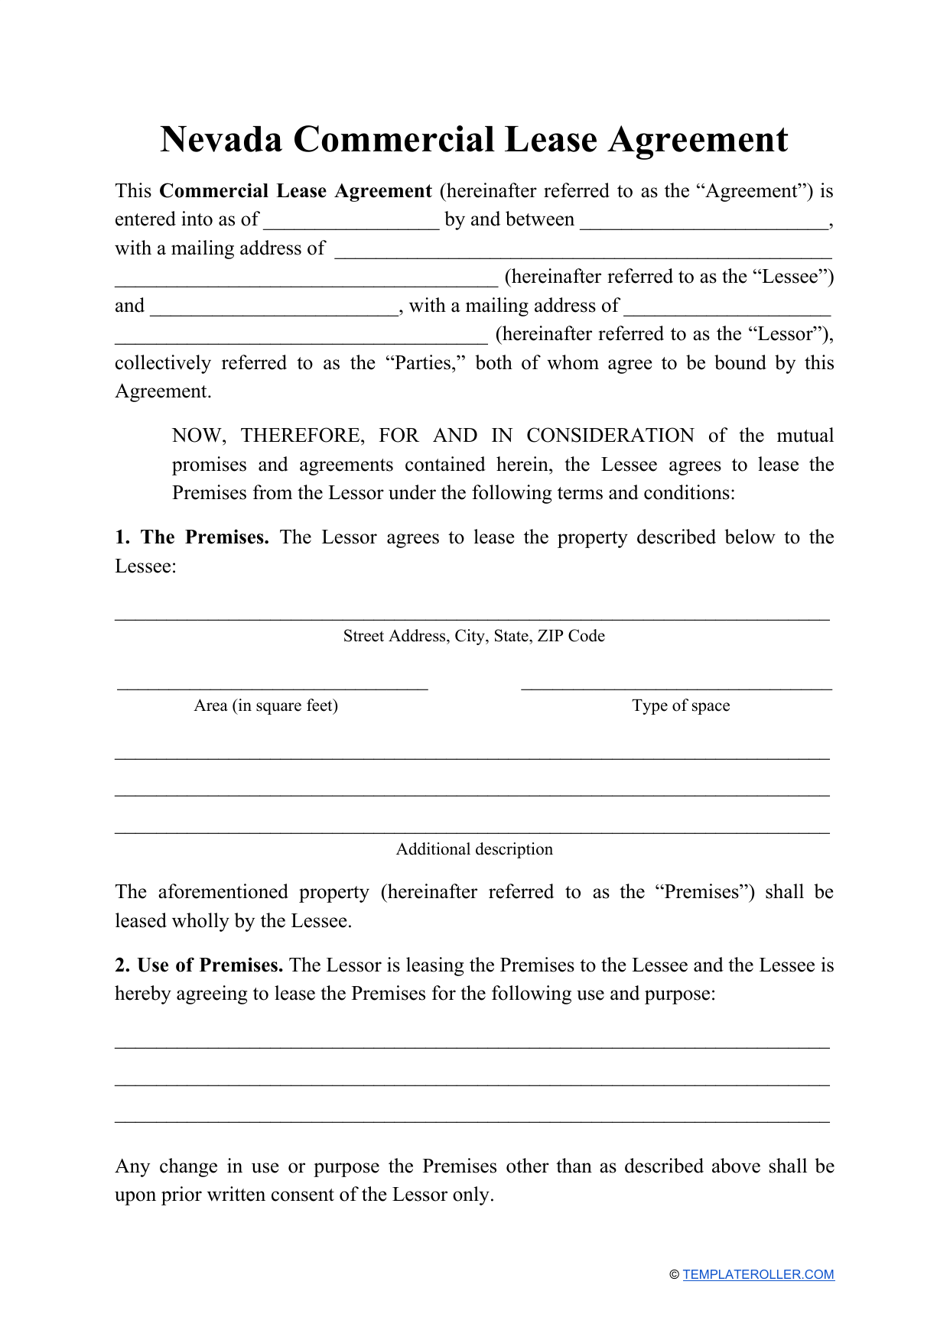 Commercial Lease Agreement Template - Nevada, Page 1